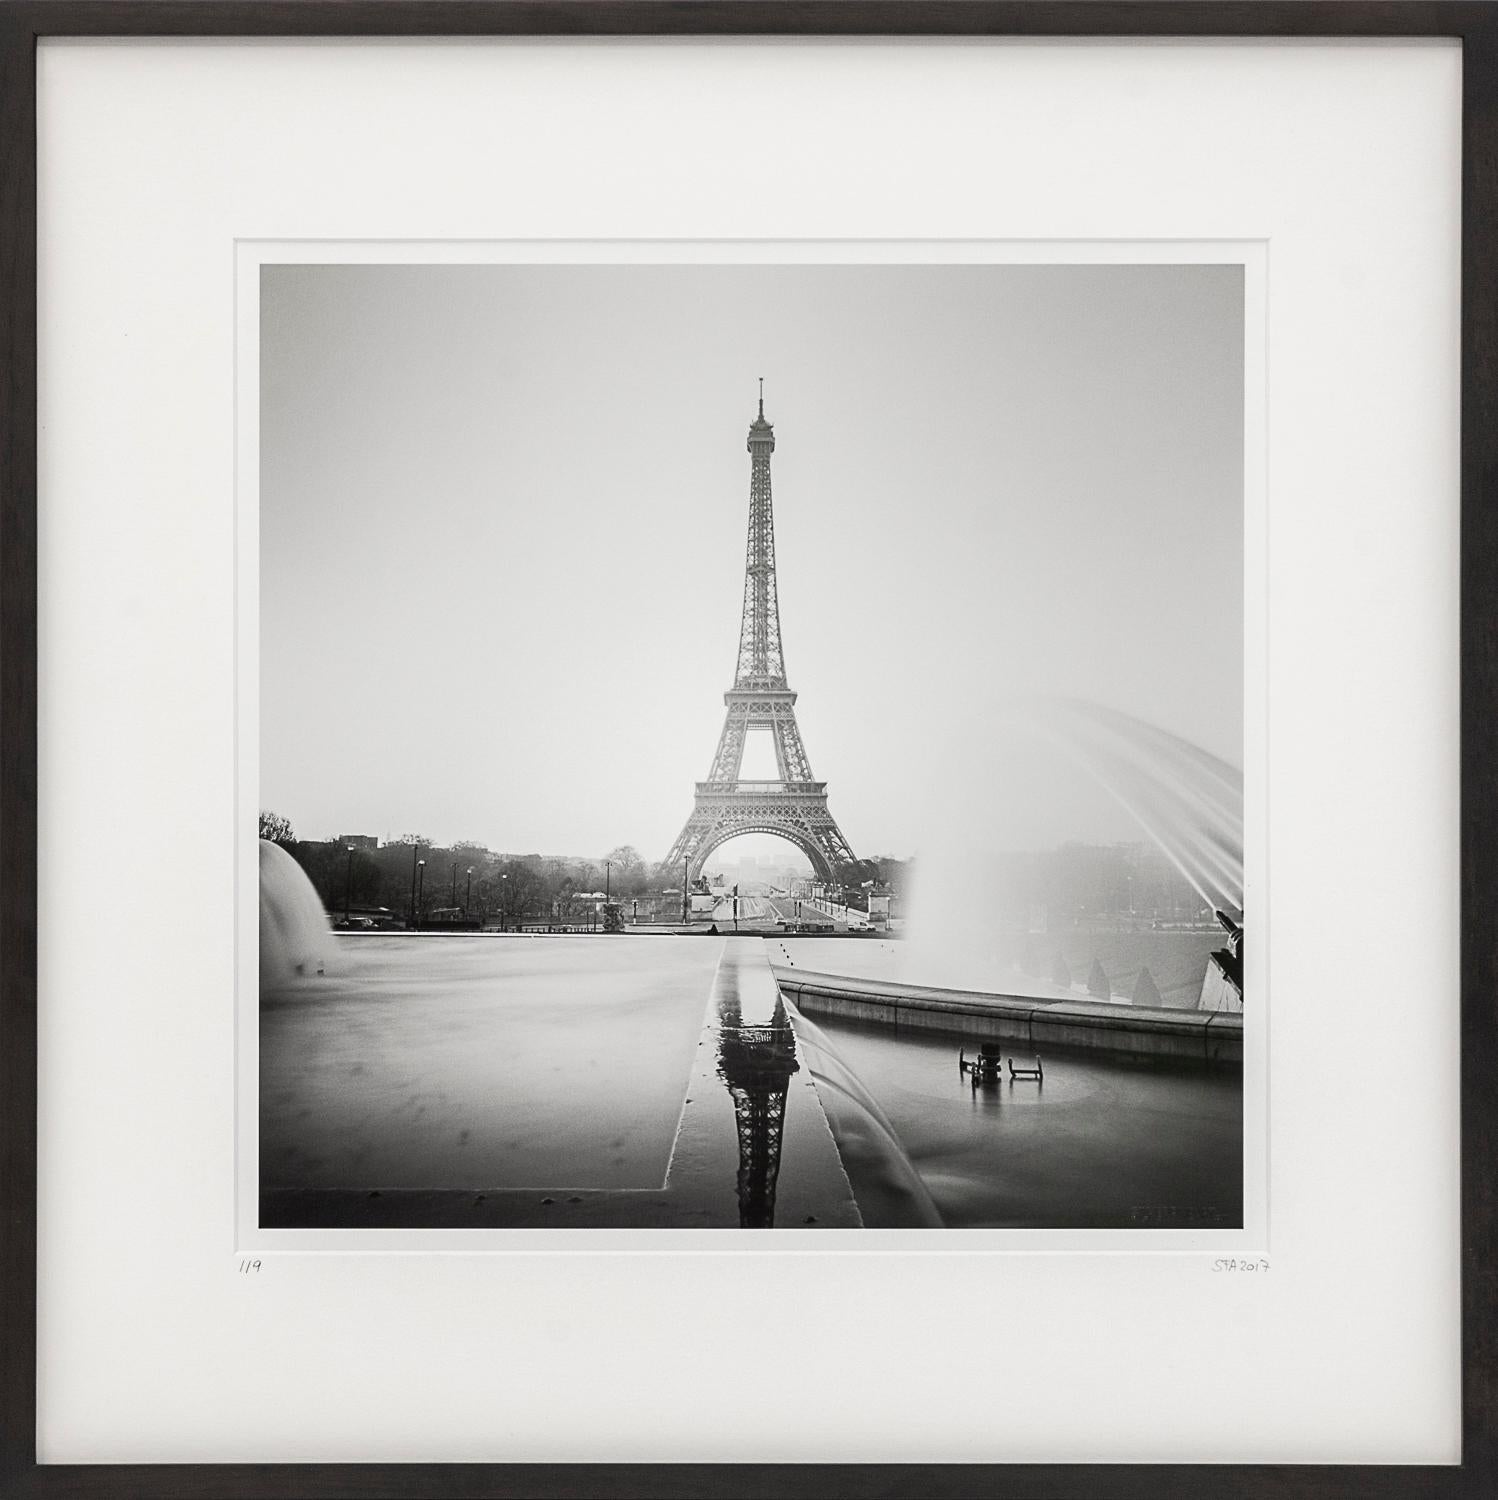 Eiffel Tower, Paris, black and white gelatin silver fineart photography, framed